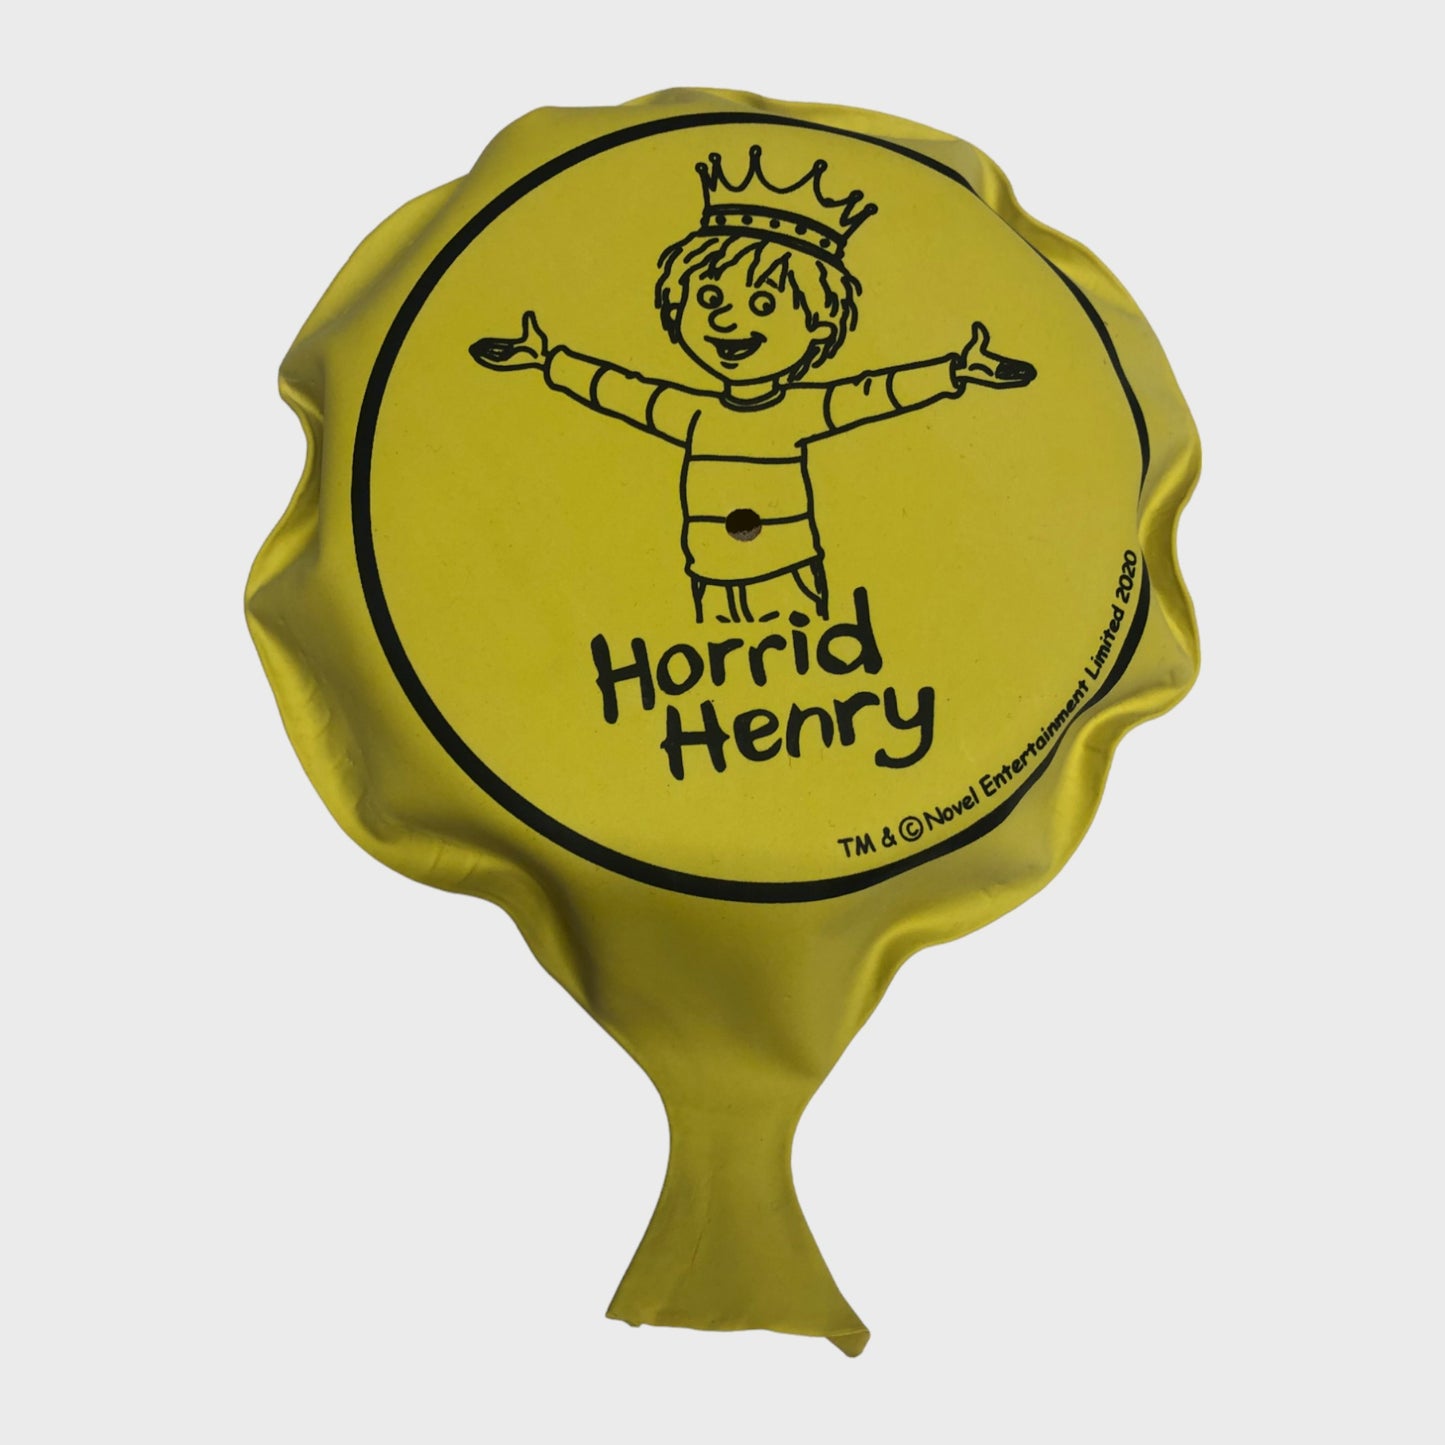 Horrid Henry Fancy Dress With Whoopie Cushion - 3 Piece Set